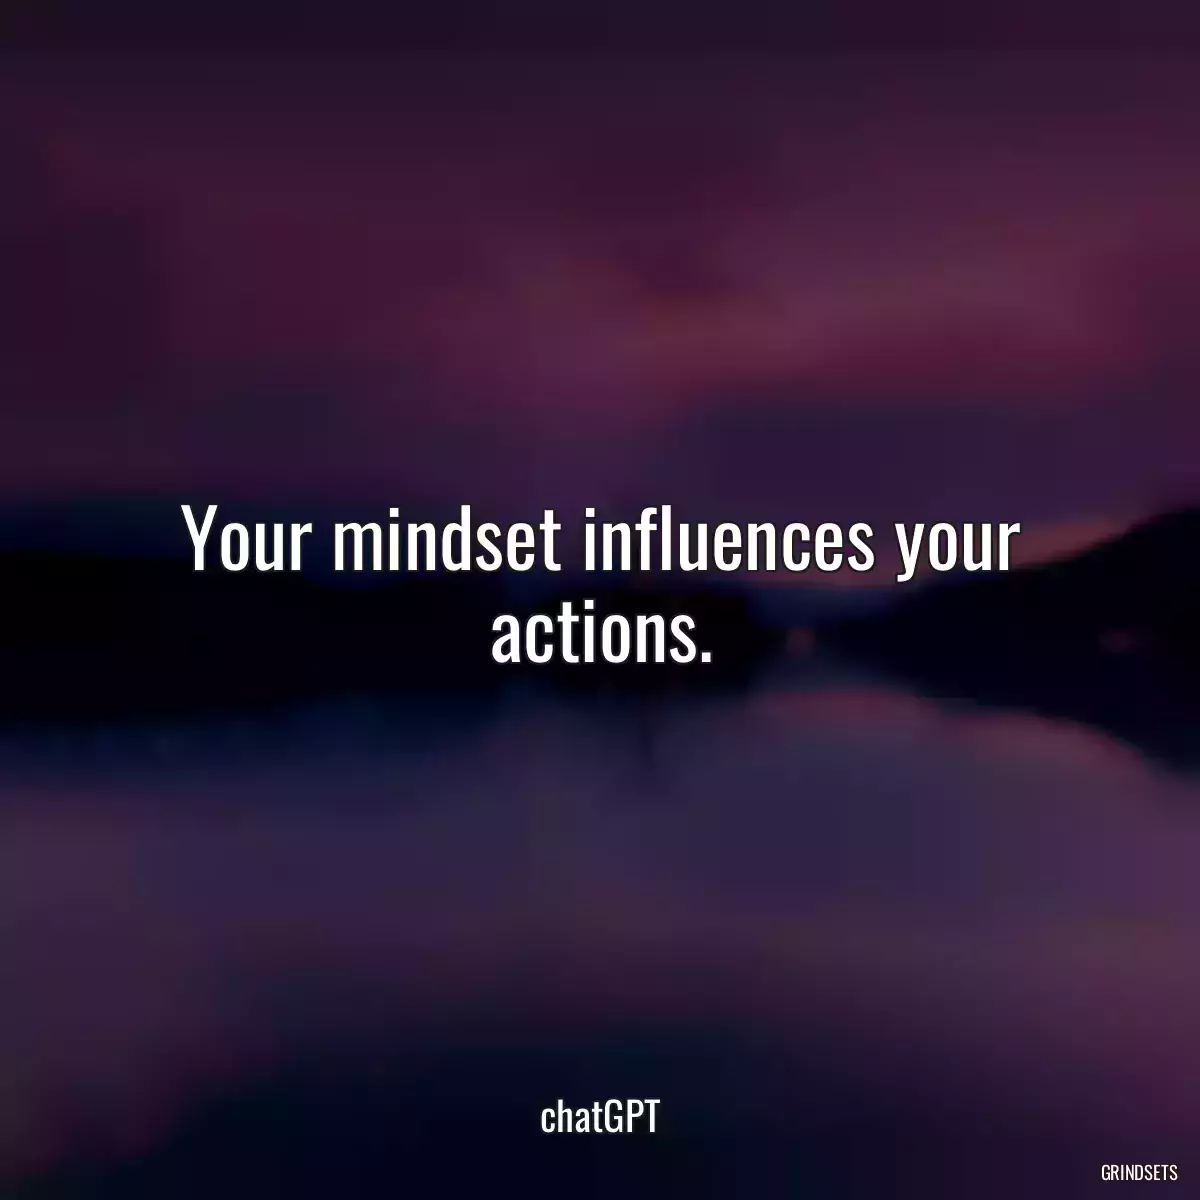 Your mindset influences your actions.